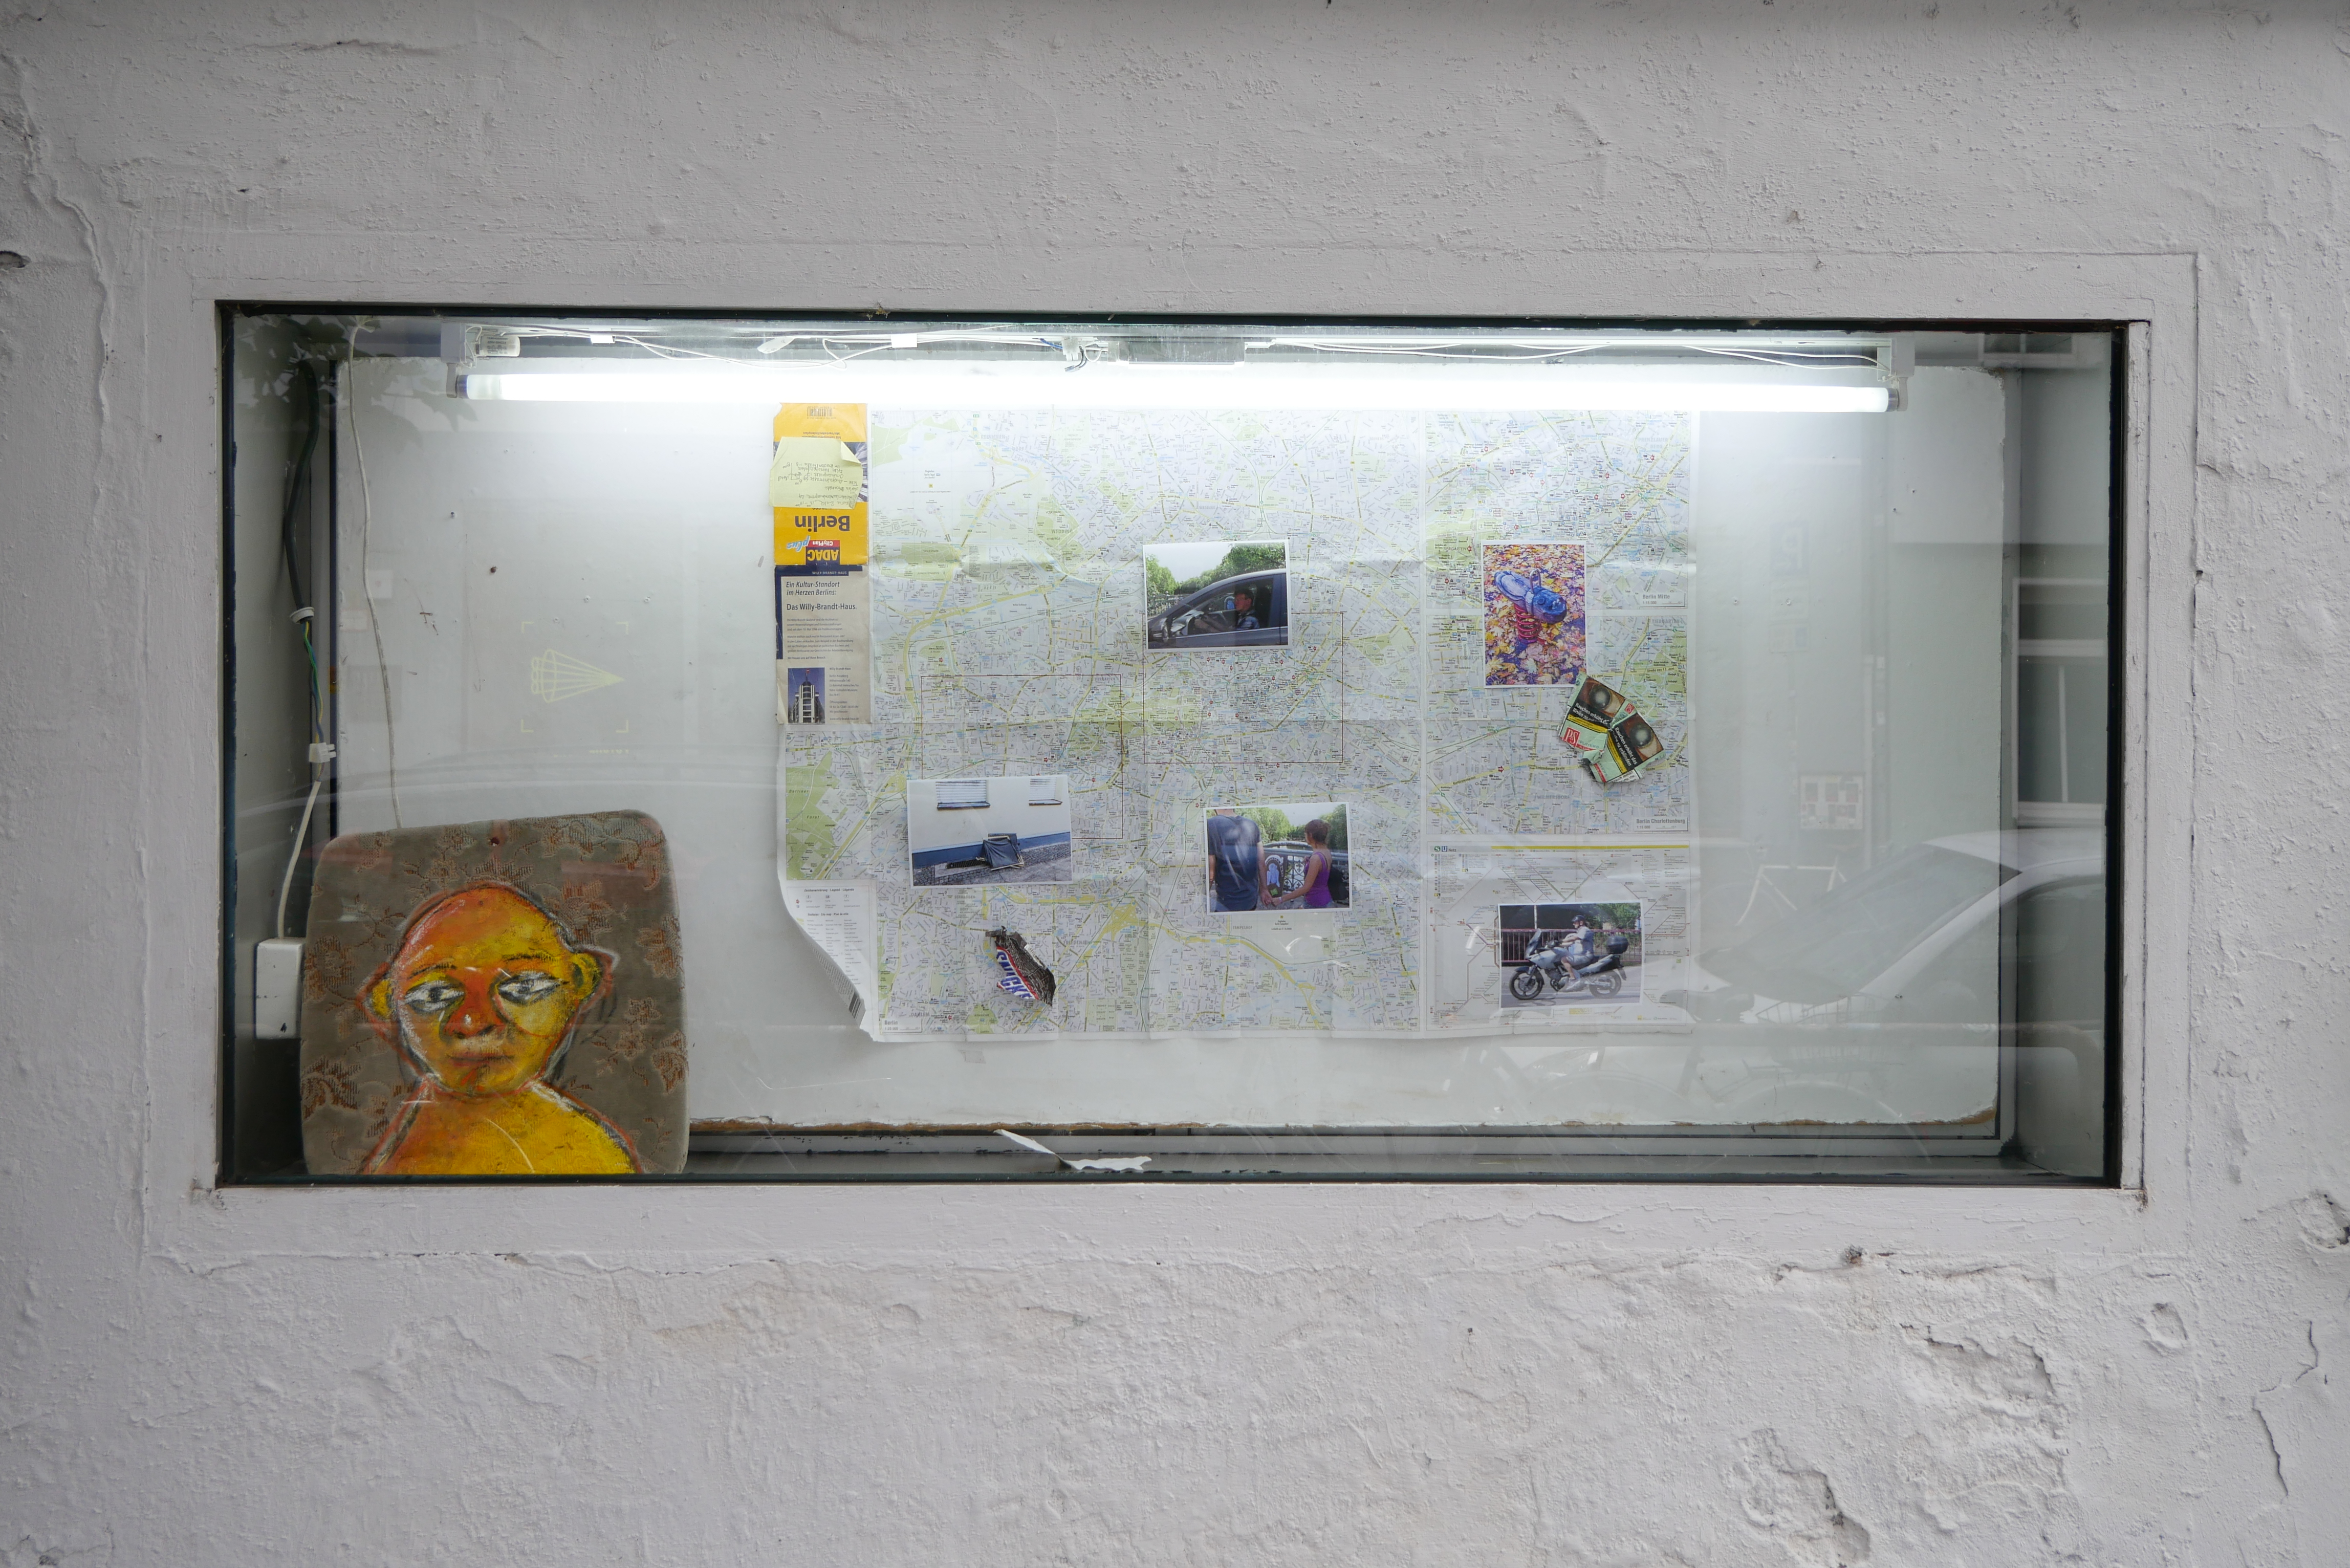 This is an image of a work by the Australian artist Shae Gregg, displayed in the showcase window of the GlogauAIR artist residency in Kreuzberg, Berlin. In it, a map of Berlin is displayed, along with photographs, trash and a painting of a face on an old upholstered chair seat.